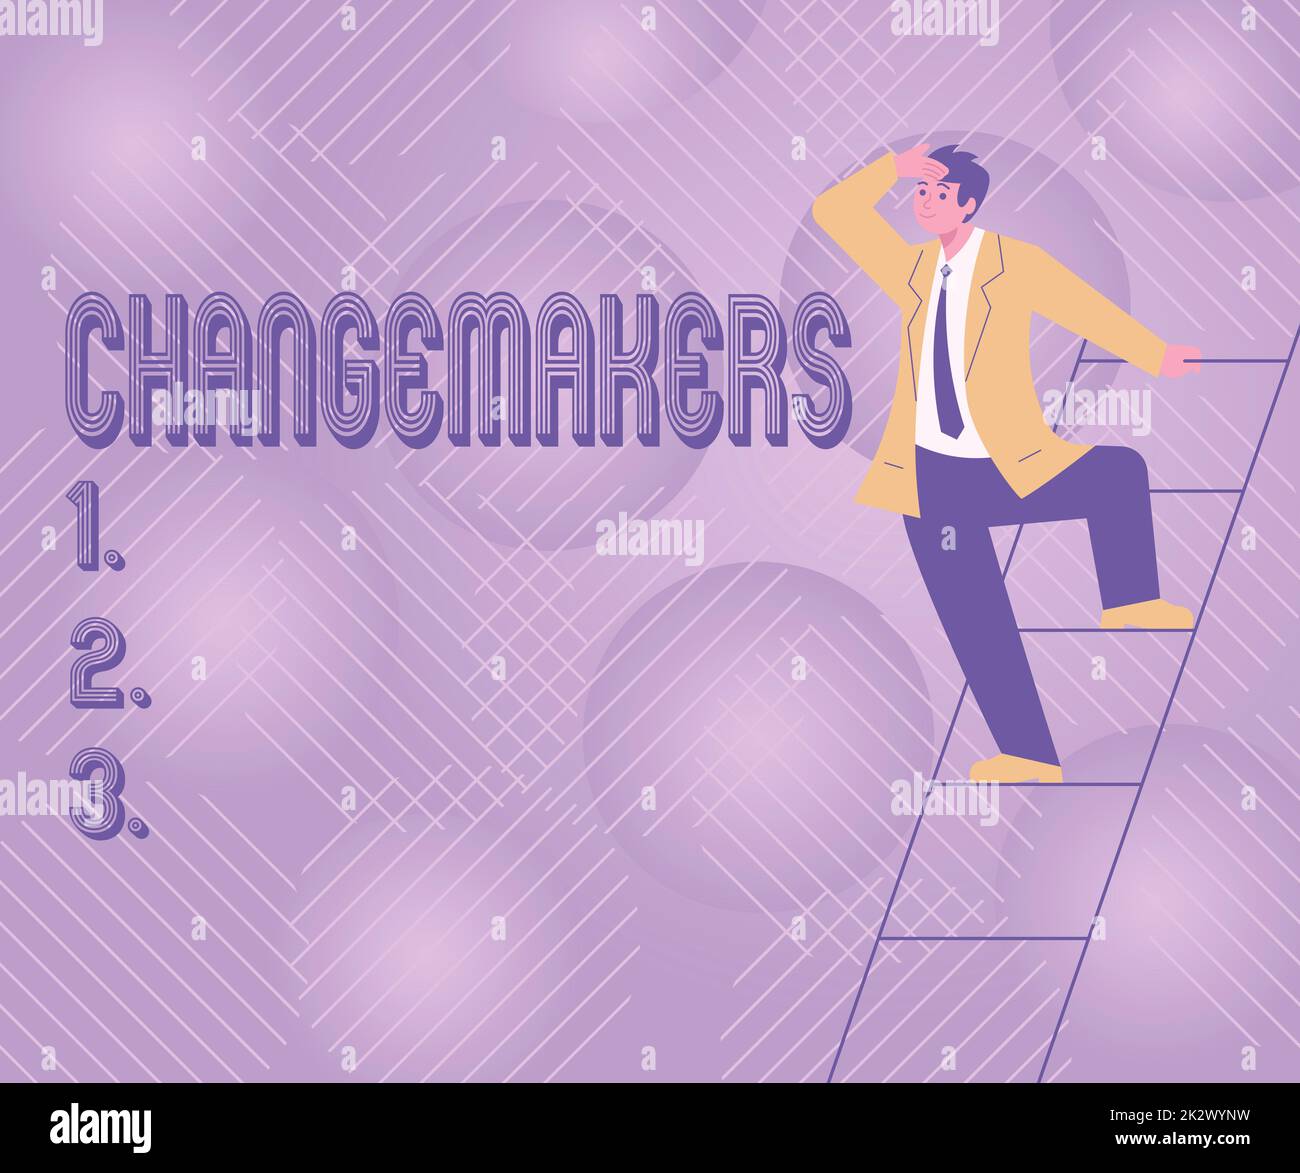 Text caption presenting Changemakers. Business idea Young Turk Influencers Acitivists Urbanization Fashion Gen X Gentleman In Suit Standing Ladder Searching Latest Plan Ideas. Stock Photo